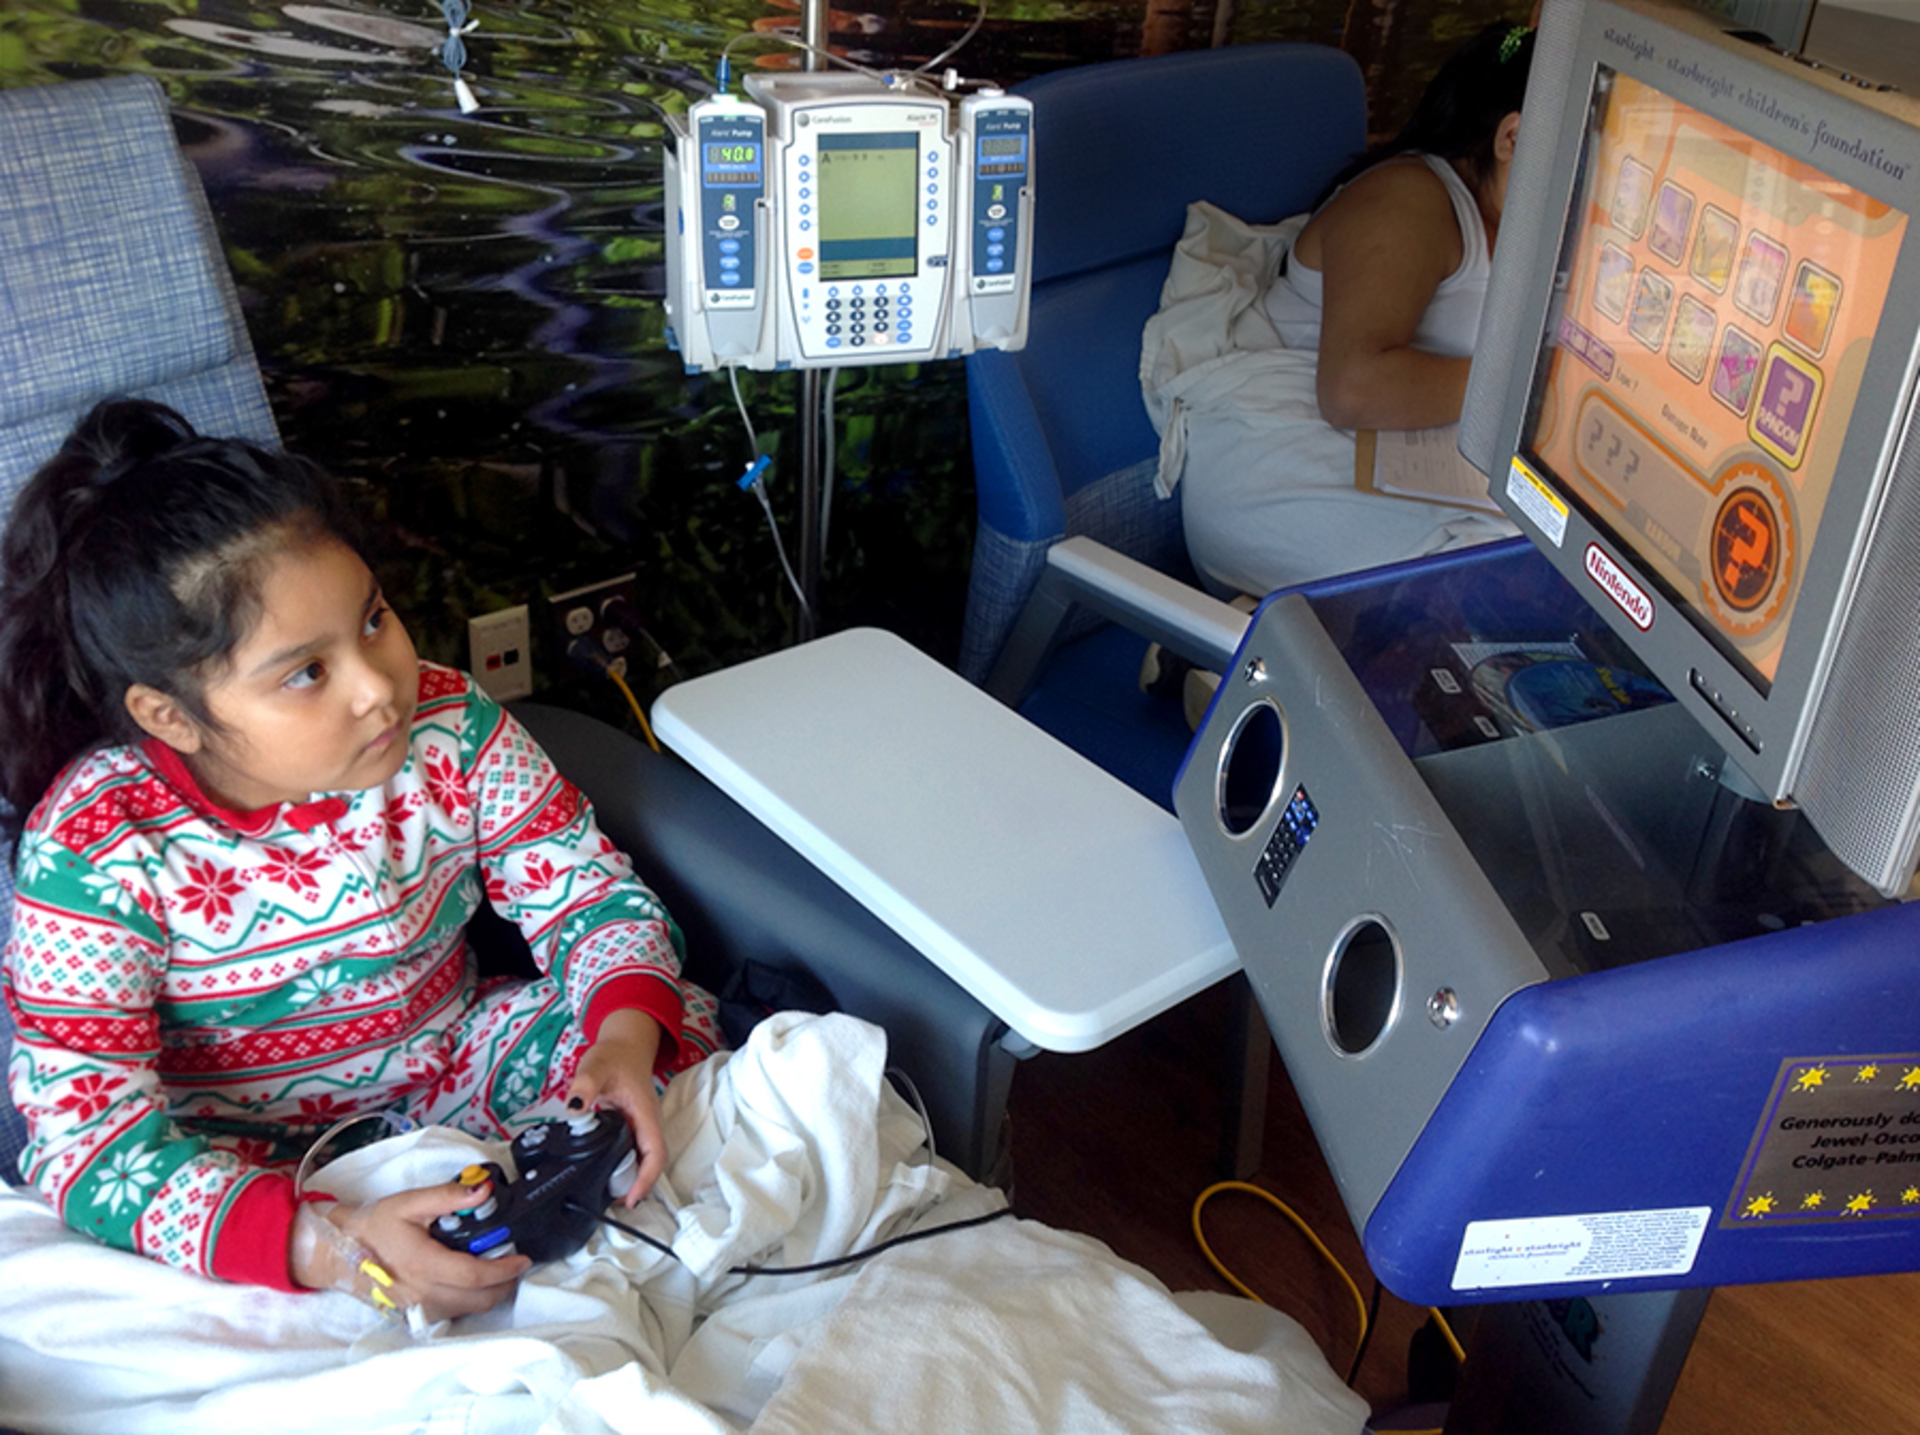 Chicagoland Children’s patient, 8-year-old Yaritza, using the gaming station